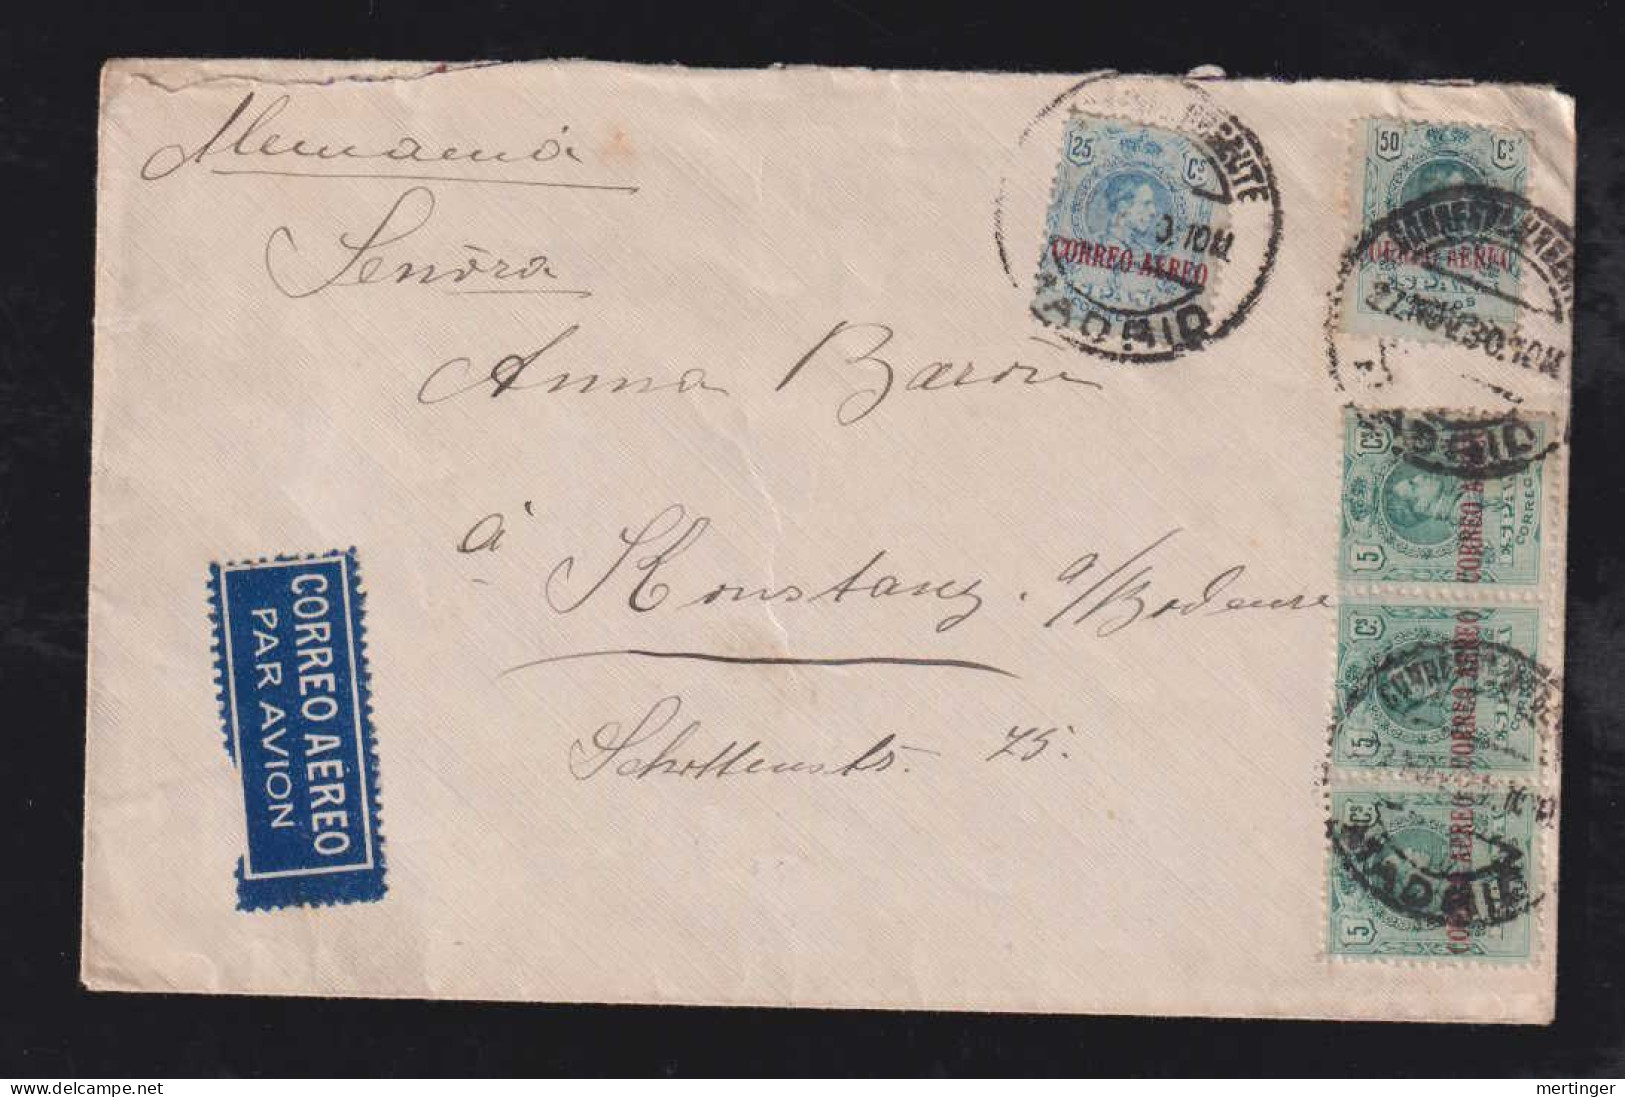 Spain 1930 Airmail Cover Overprint Stamps MADRID X KONSTANZ Germany - Covers & Documents